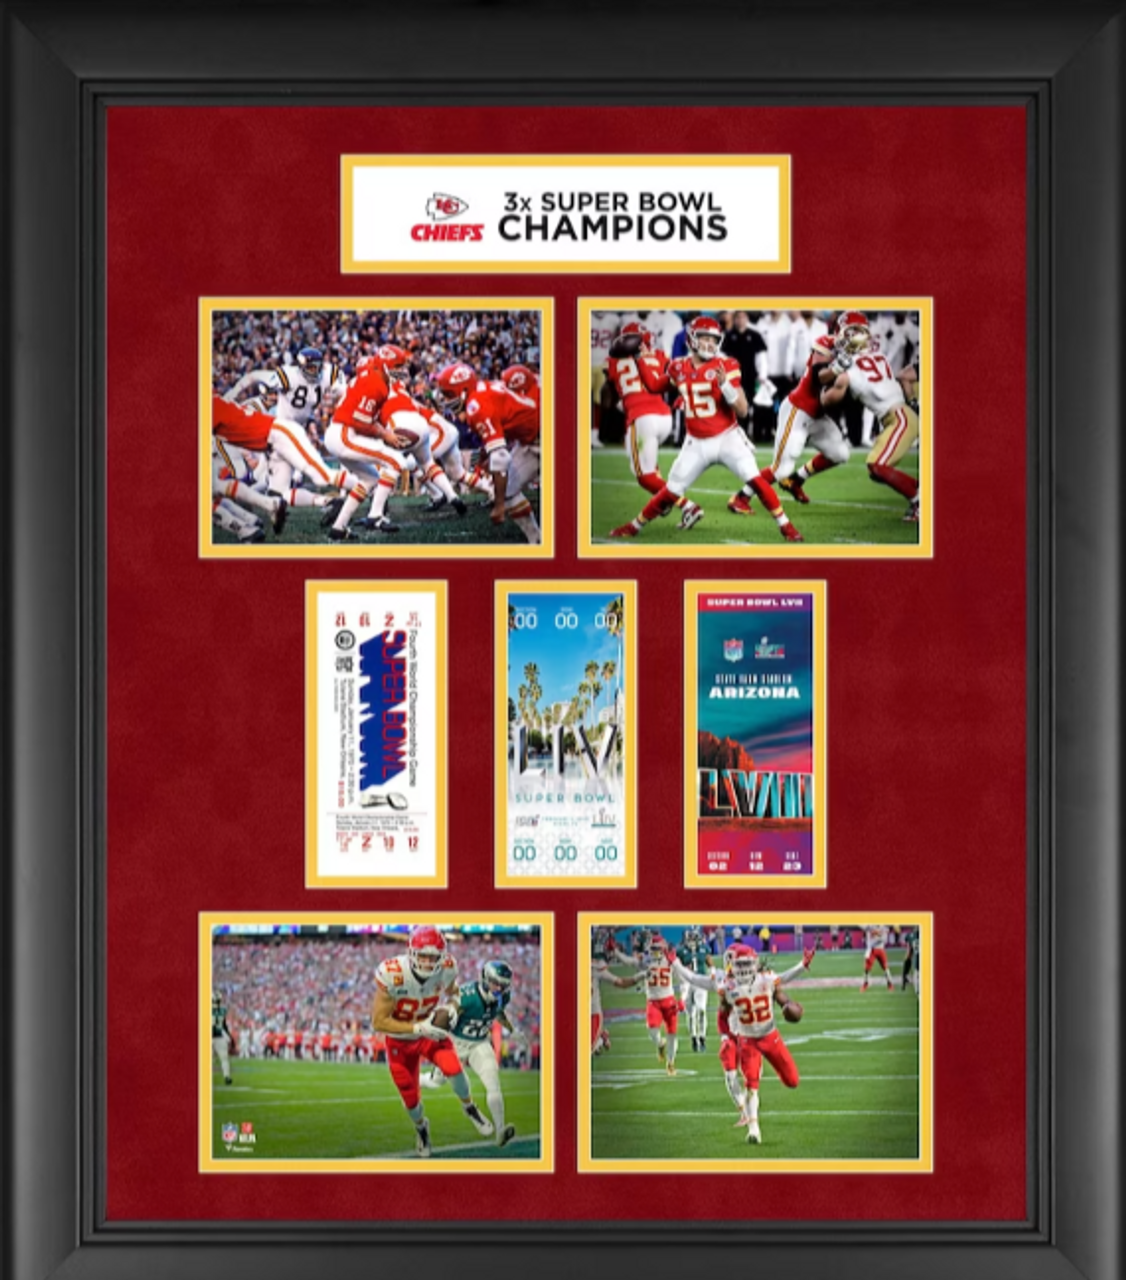 Kansas City Chiefs Framed Super Bowl LVII Champions 3-Time Ticket Collage